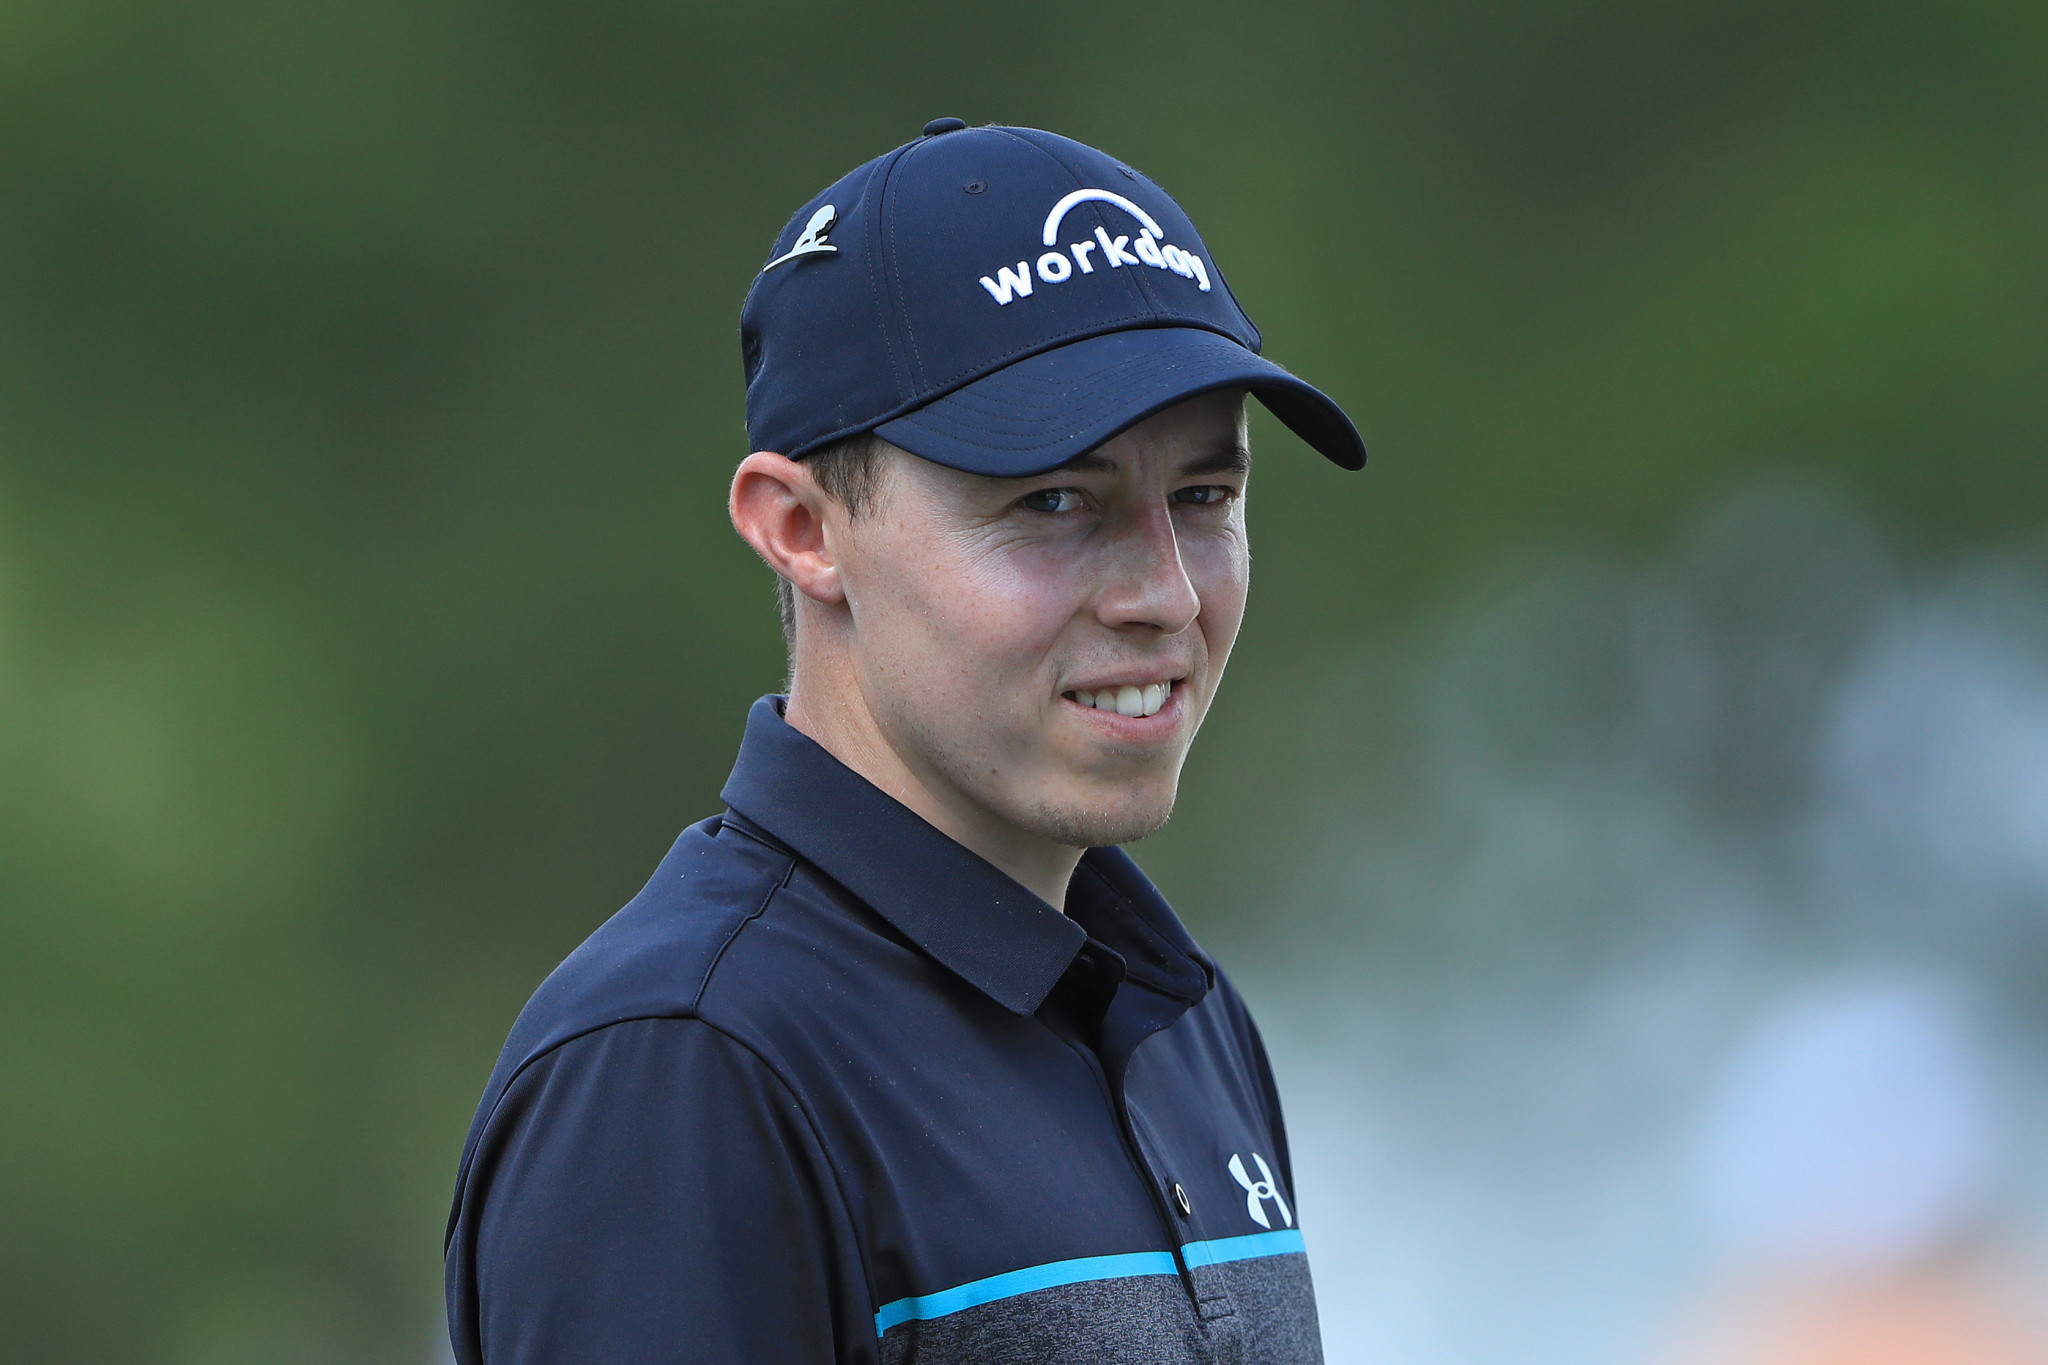 Matthew Fitzpatrick moves into two-shot lead at 2019 WGC-FedEx St. Jude Invitational with six-under par second round